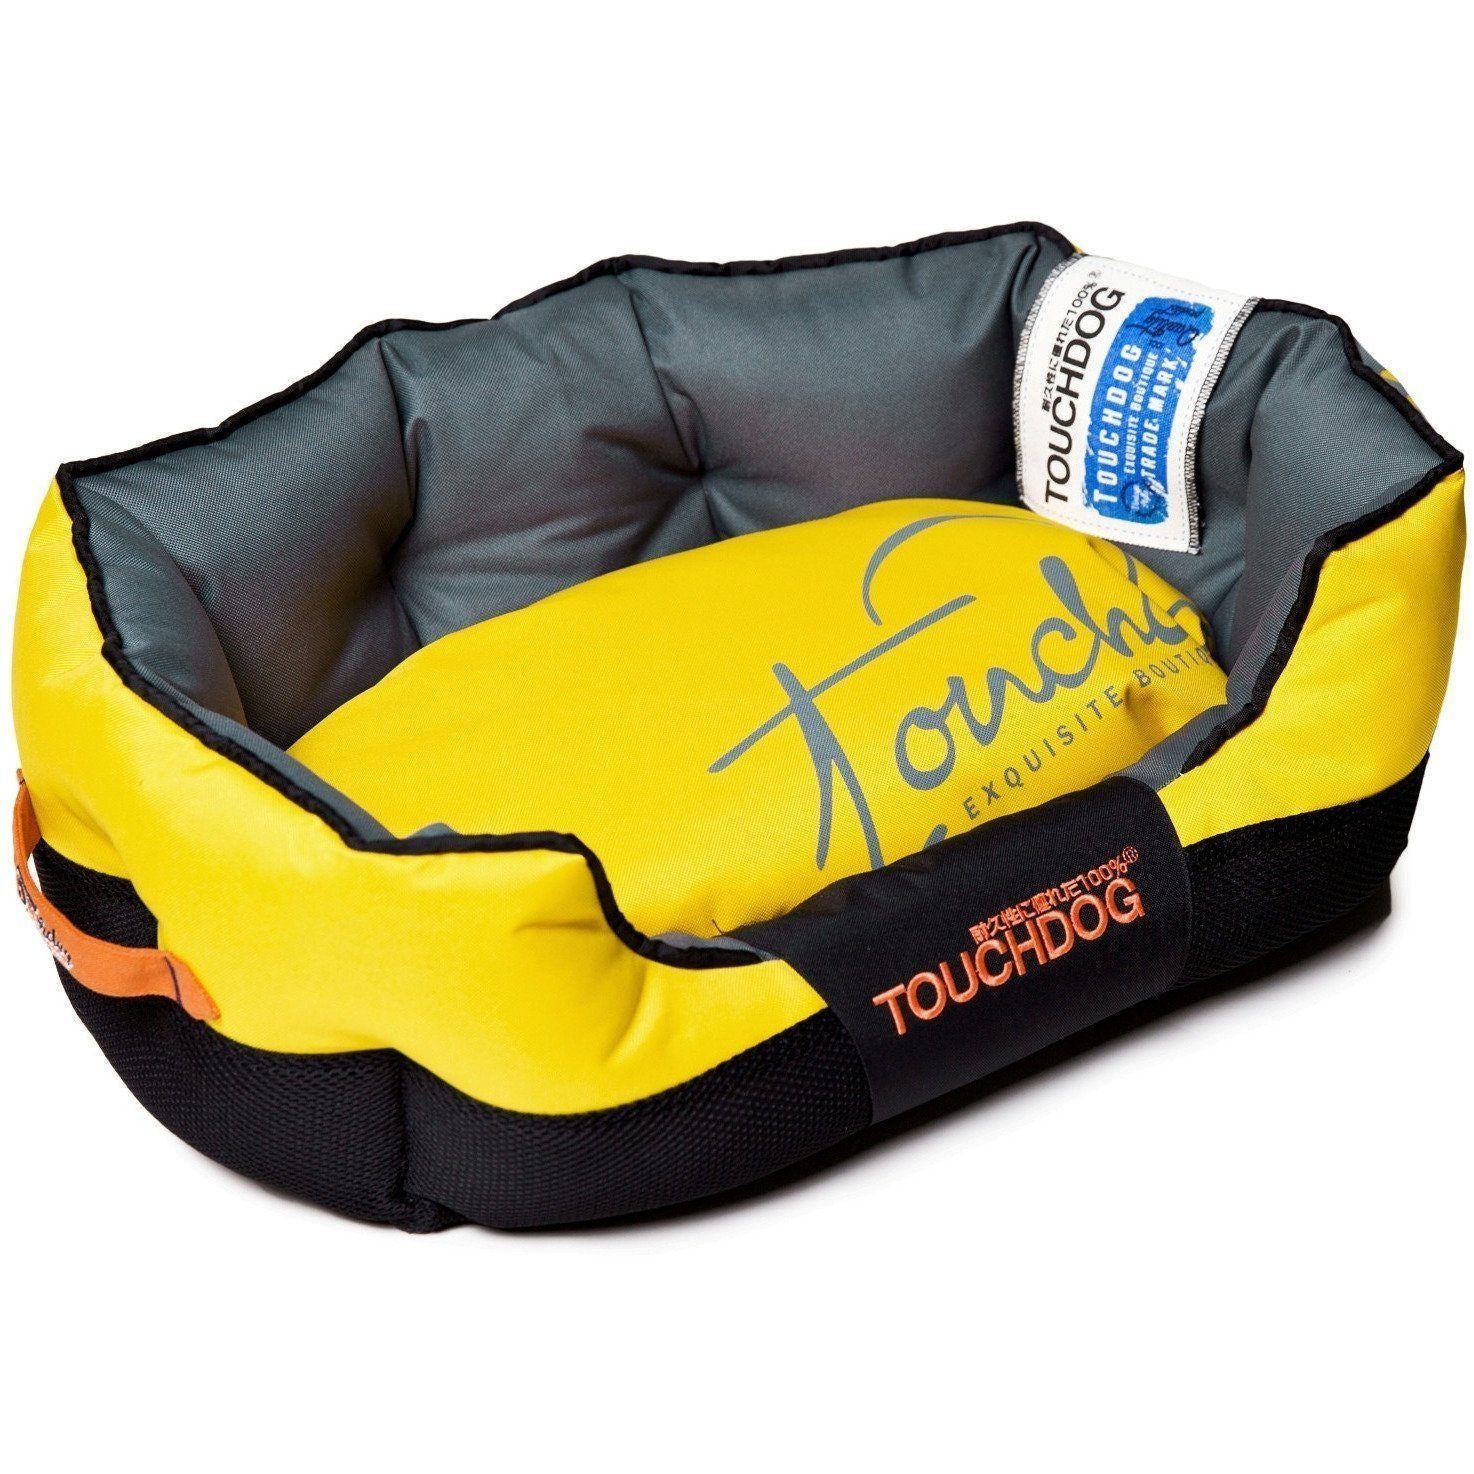 Touchdog ® 'Performance-Max' Sporty Reflective Water-Resistant Dog Bed Medium Sporty Yellow, Black